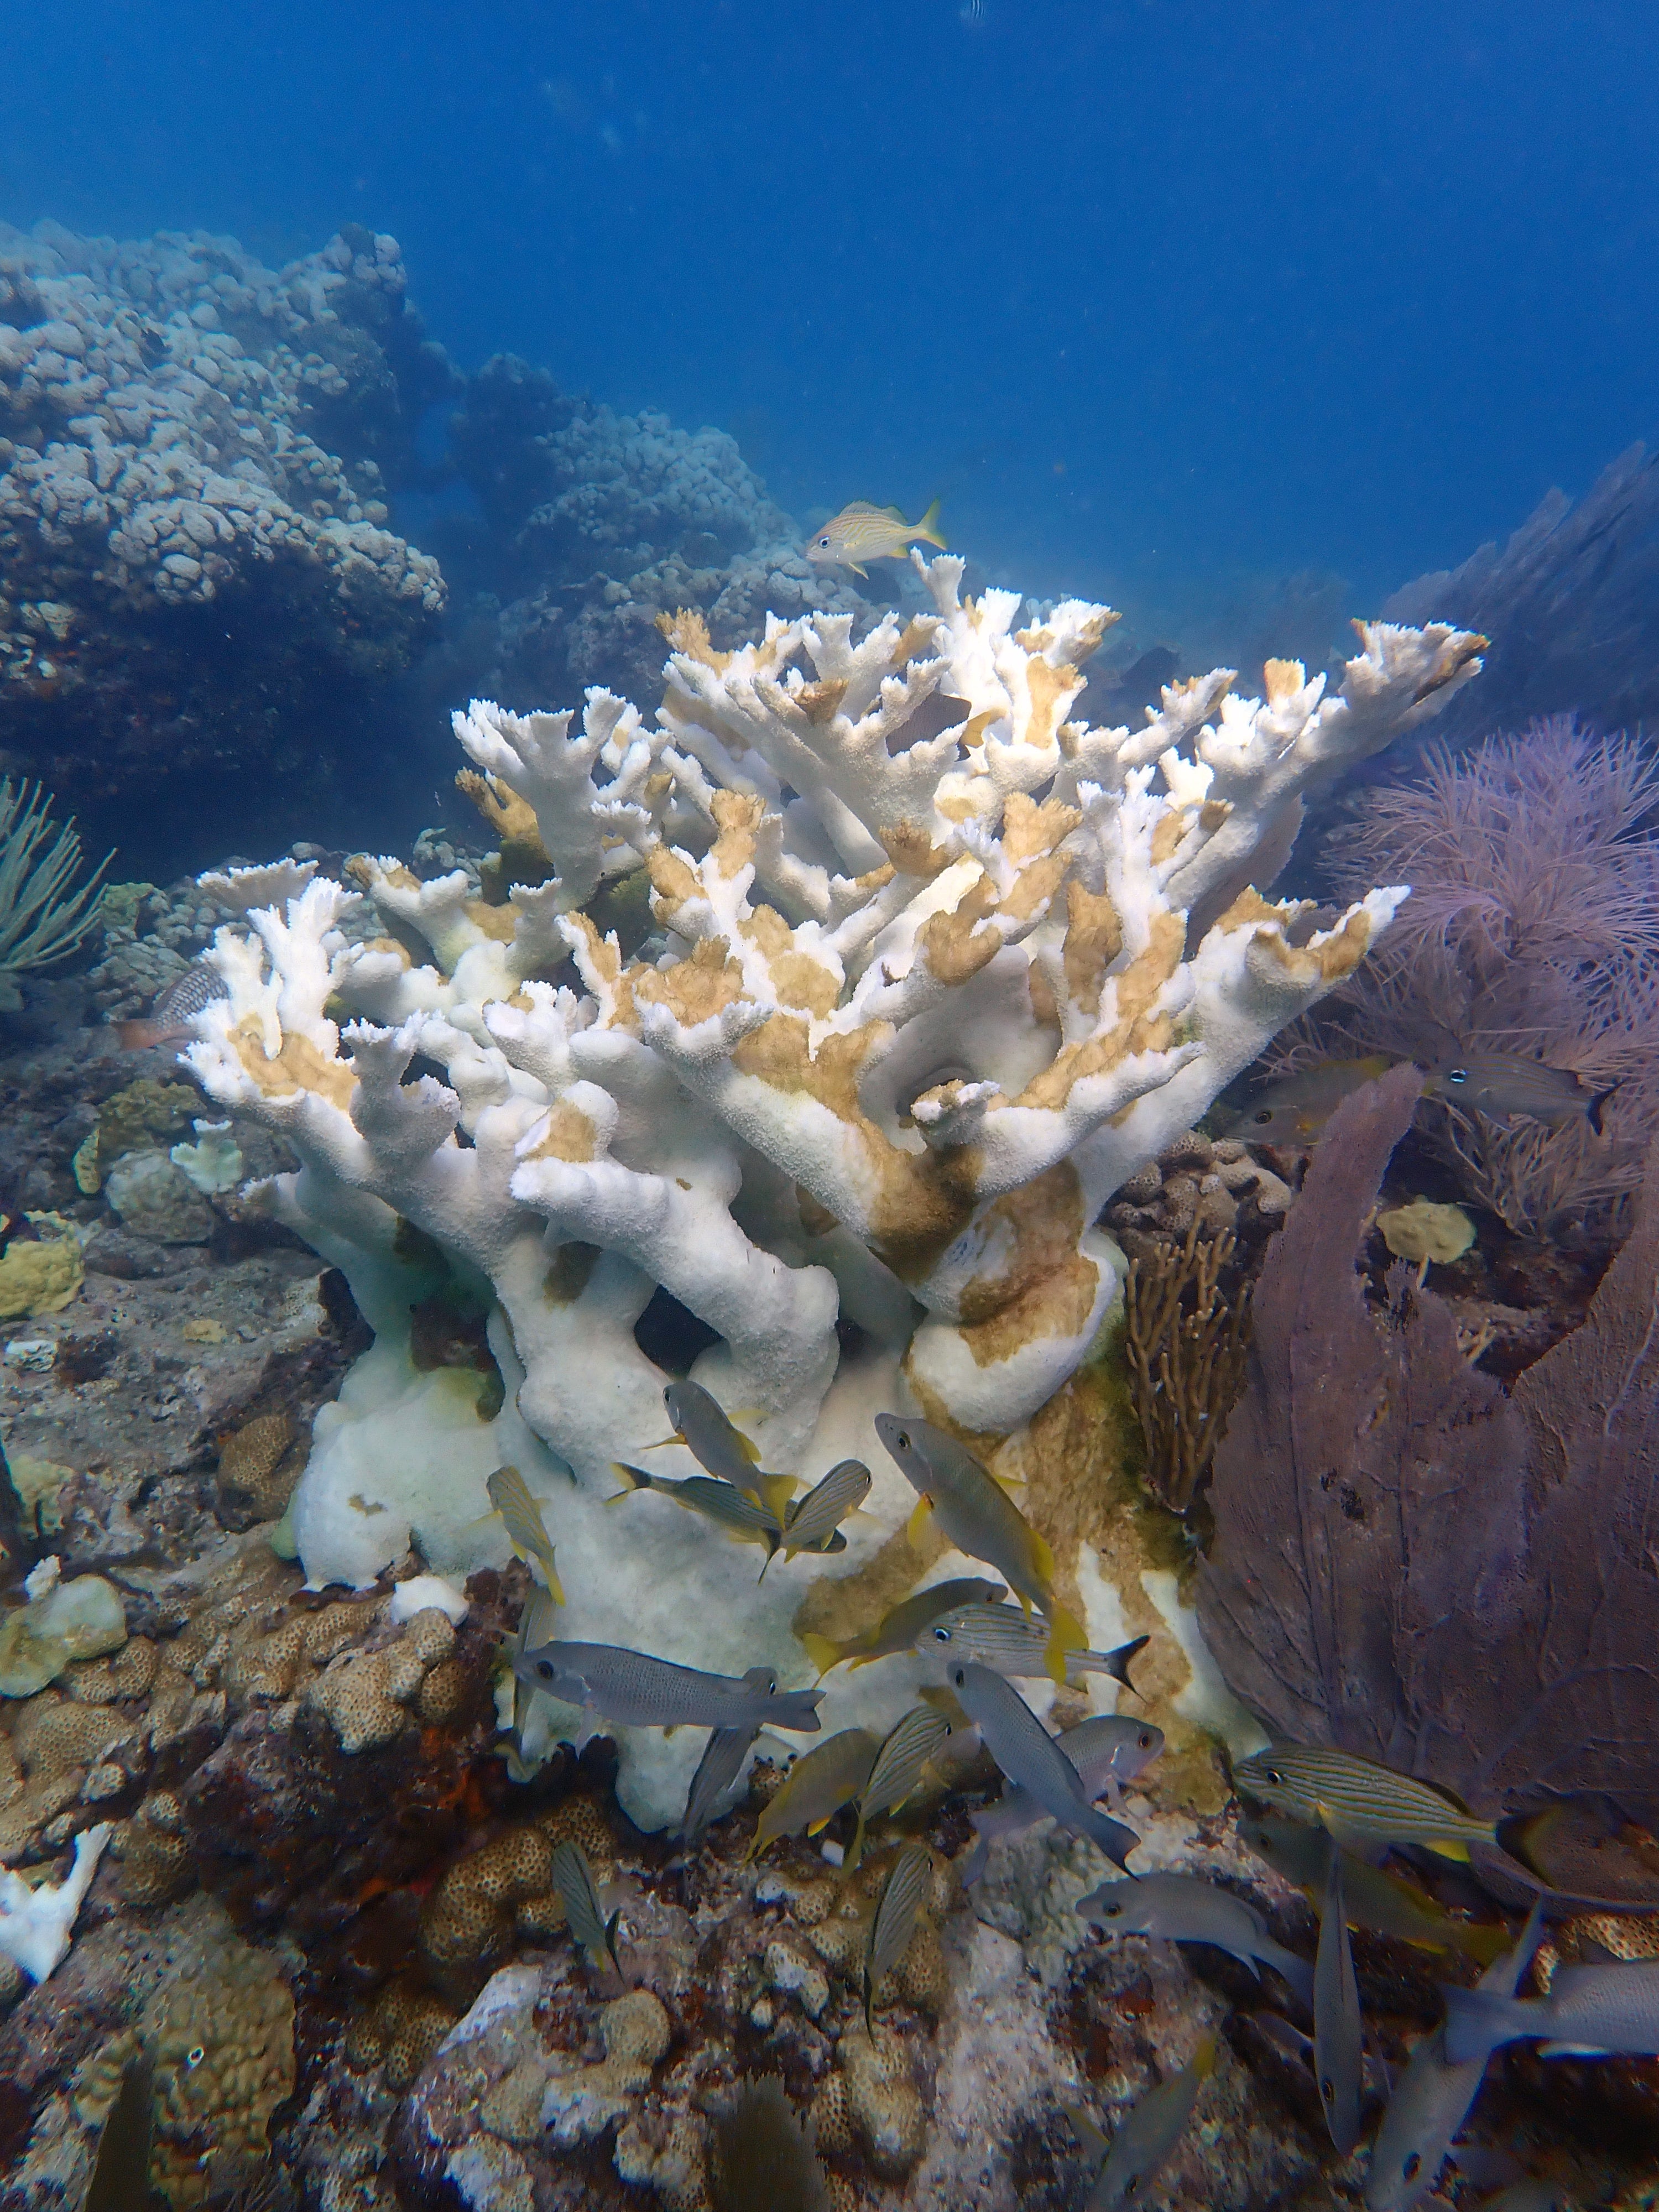 Dead coral at Sombrero Reef in the Florida Keys. The white areas are bleached coral and the brownish orange patches are ‘tissue slough’ – coral tissue that has died before it has a chance to bleach